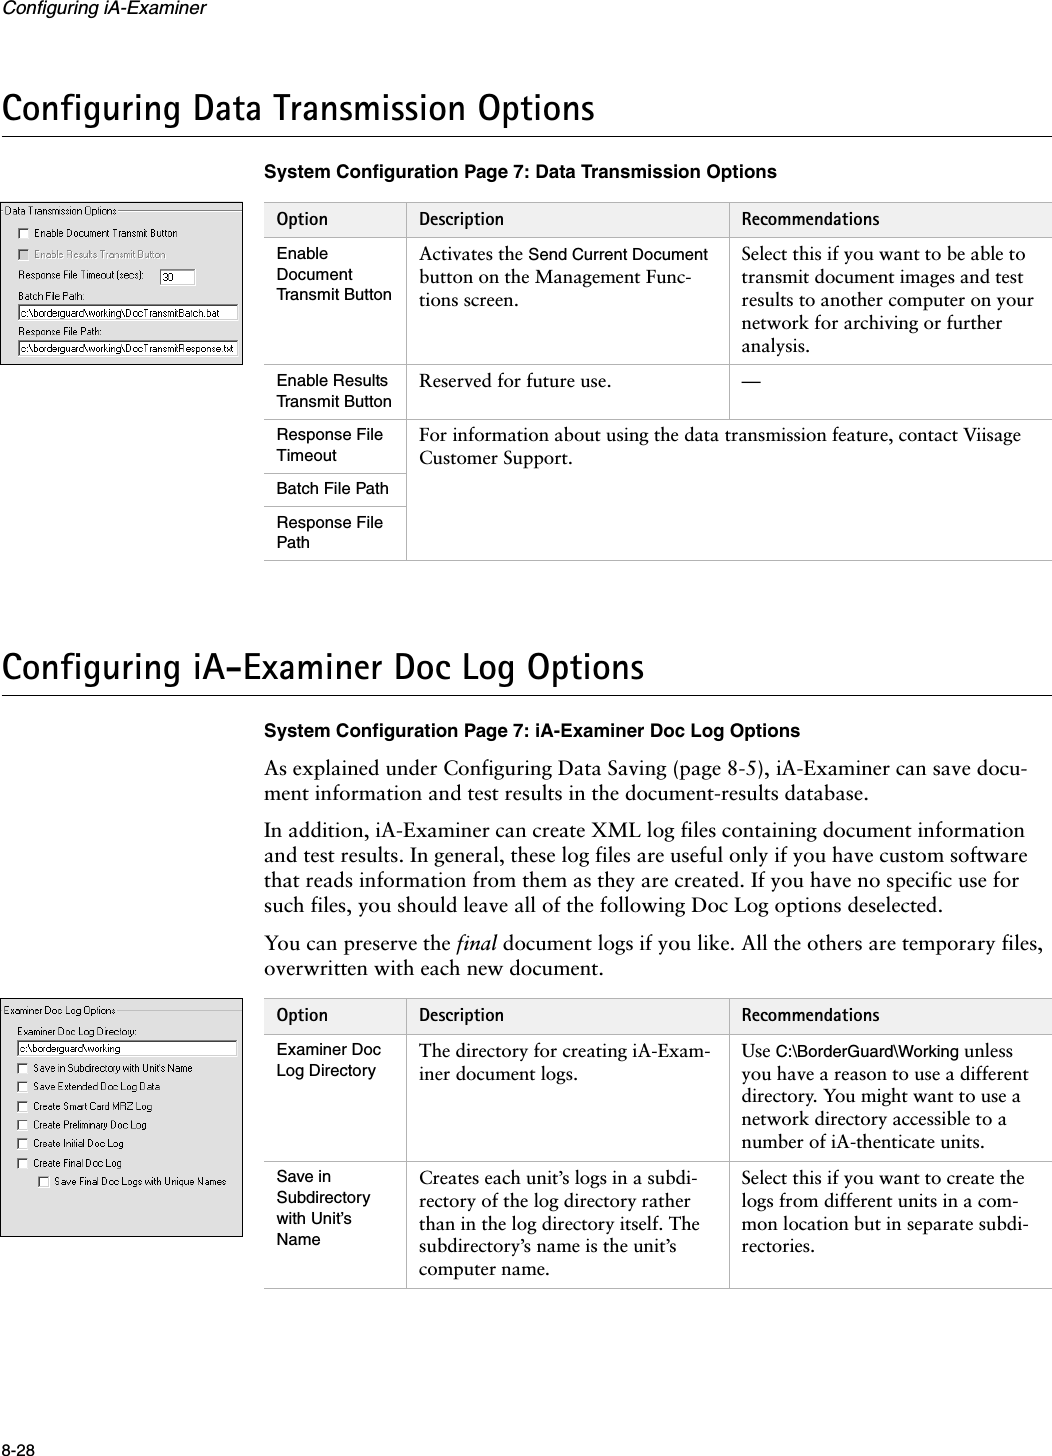 Configuring iA-Examiner8-28Configuring Data Transmission OptionsSystem Configuration Page 7: Data Transmission OptionsConfiguring iA-Examiner Doc Log OptionsSystem Configuration Page 7: iA-Examiner Doc Log OptionsAs explained under Configuring Data Saving (page 8-5), iA-Examiner can save docu-ment information and test results in the document-results database.In addition, iA-Examiner can create XML log files containing document information and test results. In general, these log files are useful only if you have custom software that reads information from them as they are created. If you have no specific use for such files, you should leave all of the following Doc Log options deselected.You can preserve the final document logs if you like. All the others are temporary files, overwritten with each new document.Option Description RecommendationsEnable Document Transmit ButtonActivates the Send Current Document button on the Management Func-tions screen.Select this if you want to be able to transmit document images and test results to another computer on your network for archiving or further analysis.Enable Results Transmit ButtonReserved for future use. —Response File TimeoutFor information about using the data transmission feature, contact Viisage Customer Support.Batch File PathResponse File PathOption Description RecommendationsExaminer Doc Log DirectoryThe directory for creating iA-Exam-iner document logs.Use C:\BorderGuard\Working unless you have a reason to use a different directory. You might want to use a network directory accessible to a number of iA-thenticate units.Save in Subdirectory with Unit’s NameCreates each unit’s logs in a subdi-rectory of the log directory rather than in the log directory itself. The subdirectory’s name is the unit’s computer name.Select this if you want to create the logs from different units in a com-mon location but in separate subdi-rectories.